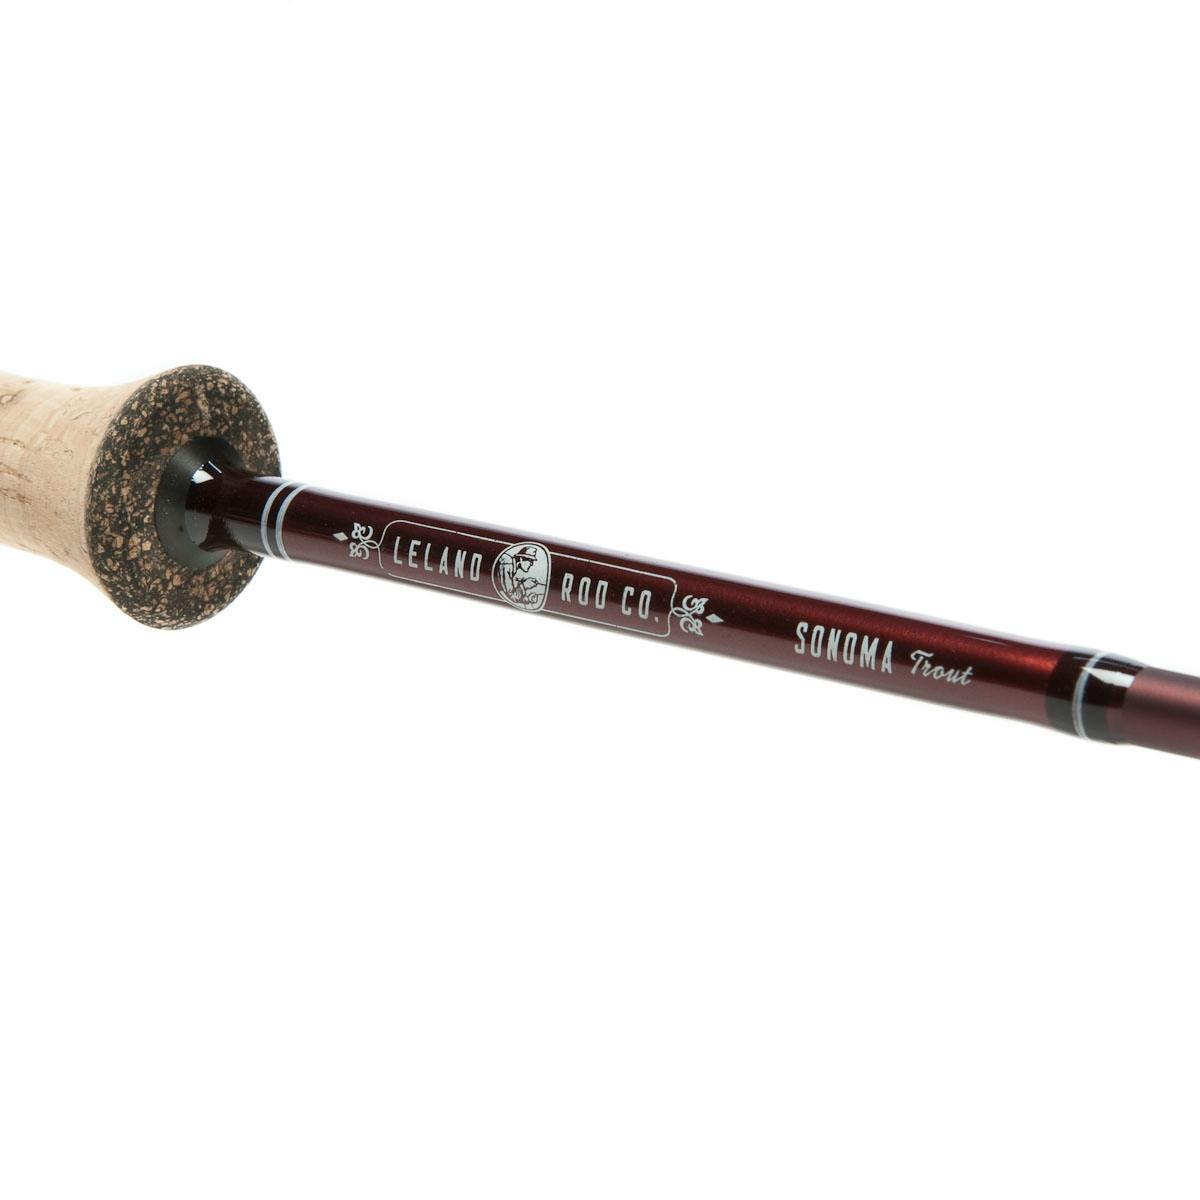 Sonoma Starter Trout Fly Fishing Rod 8' #5 4pc (Rod Only)